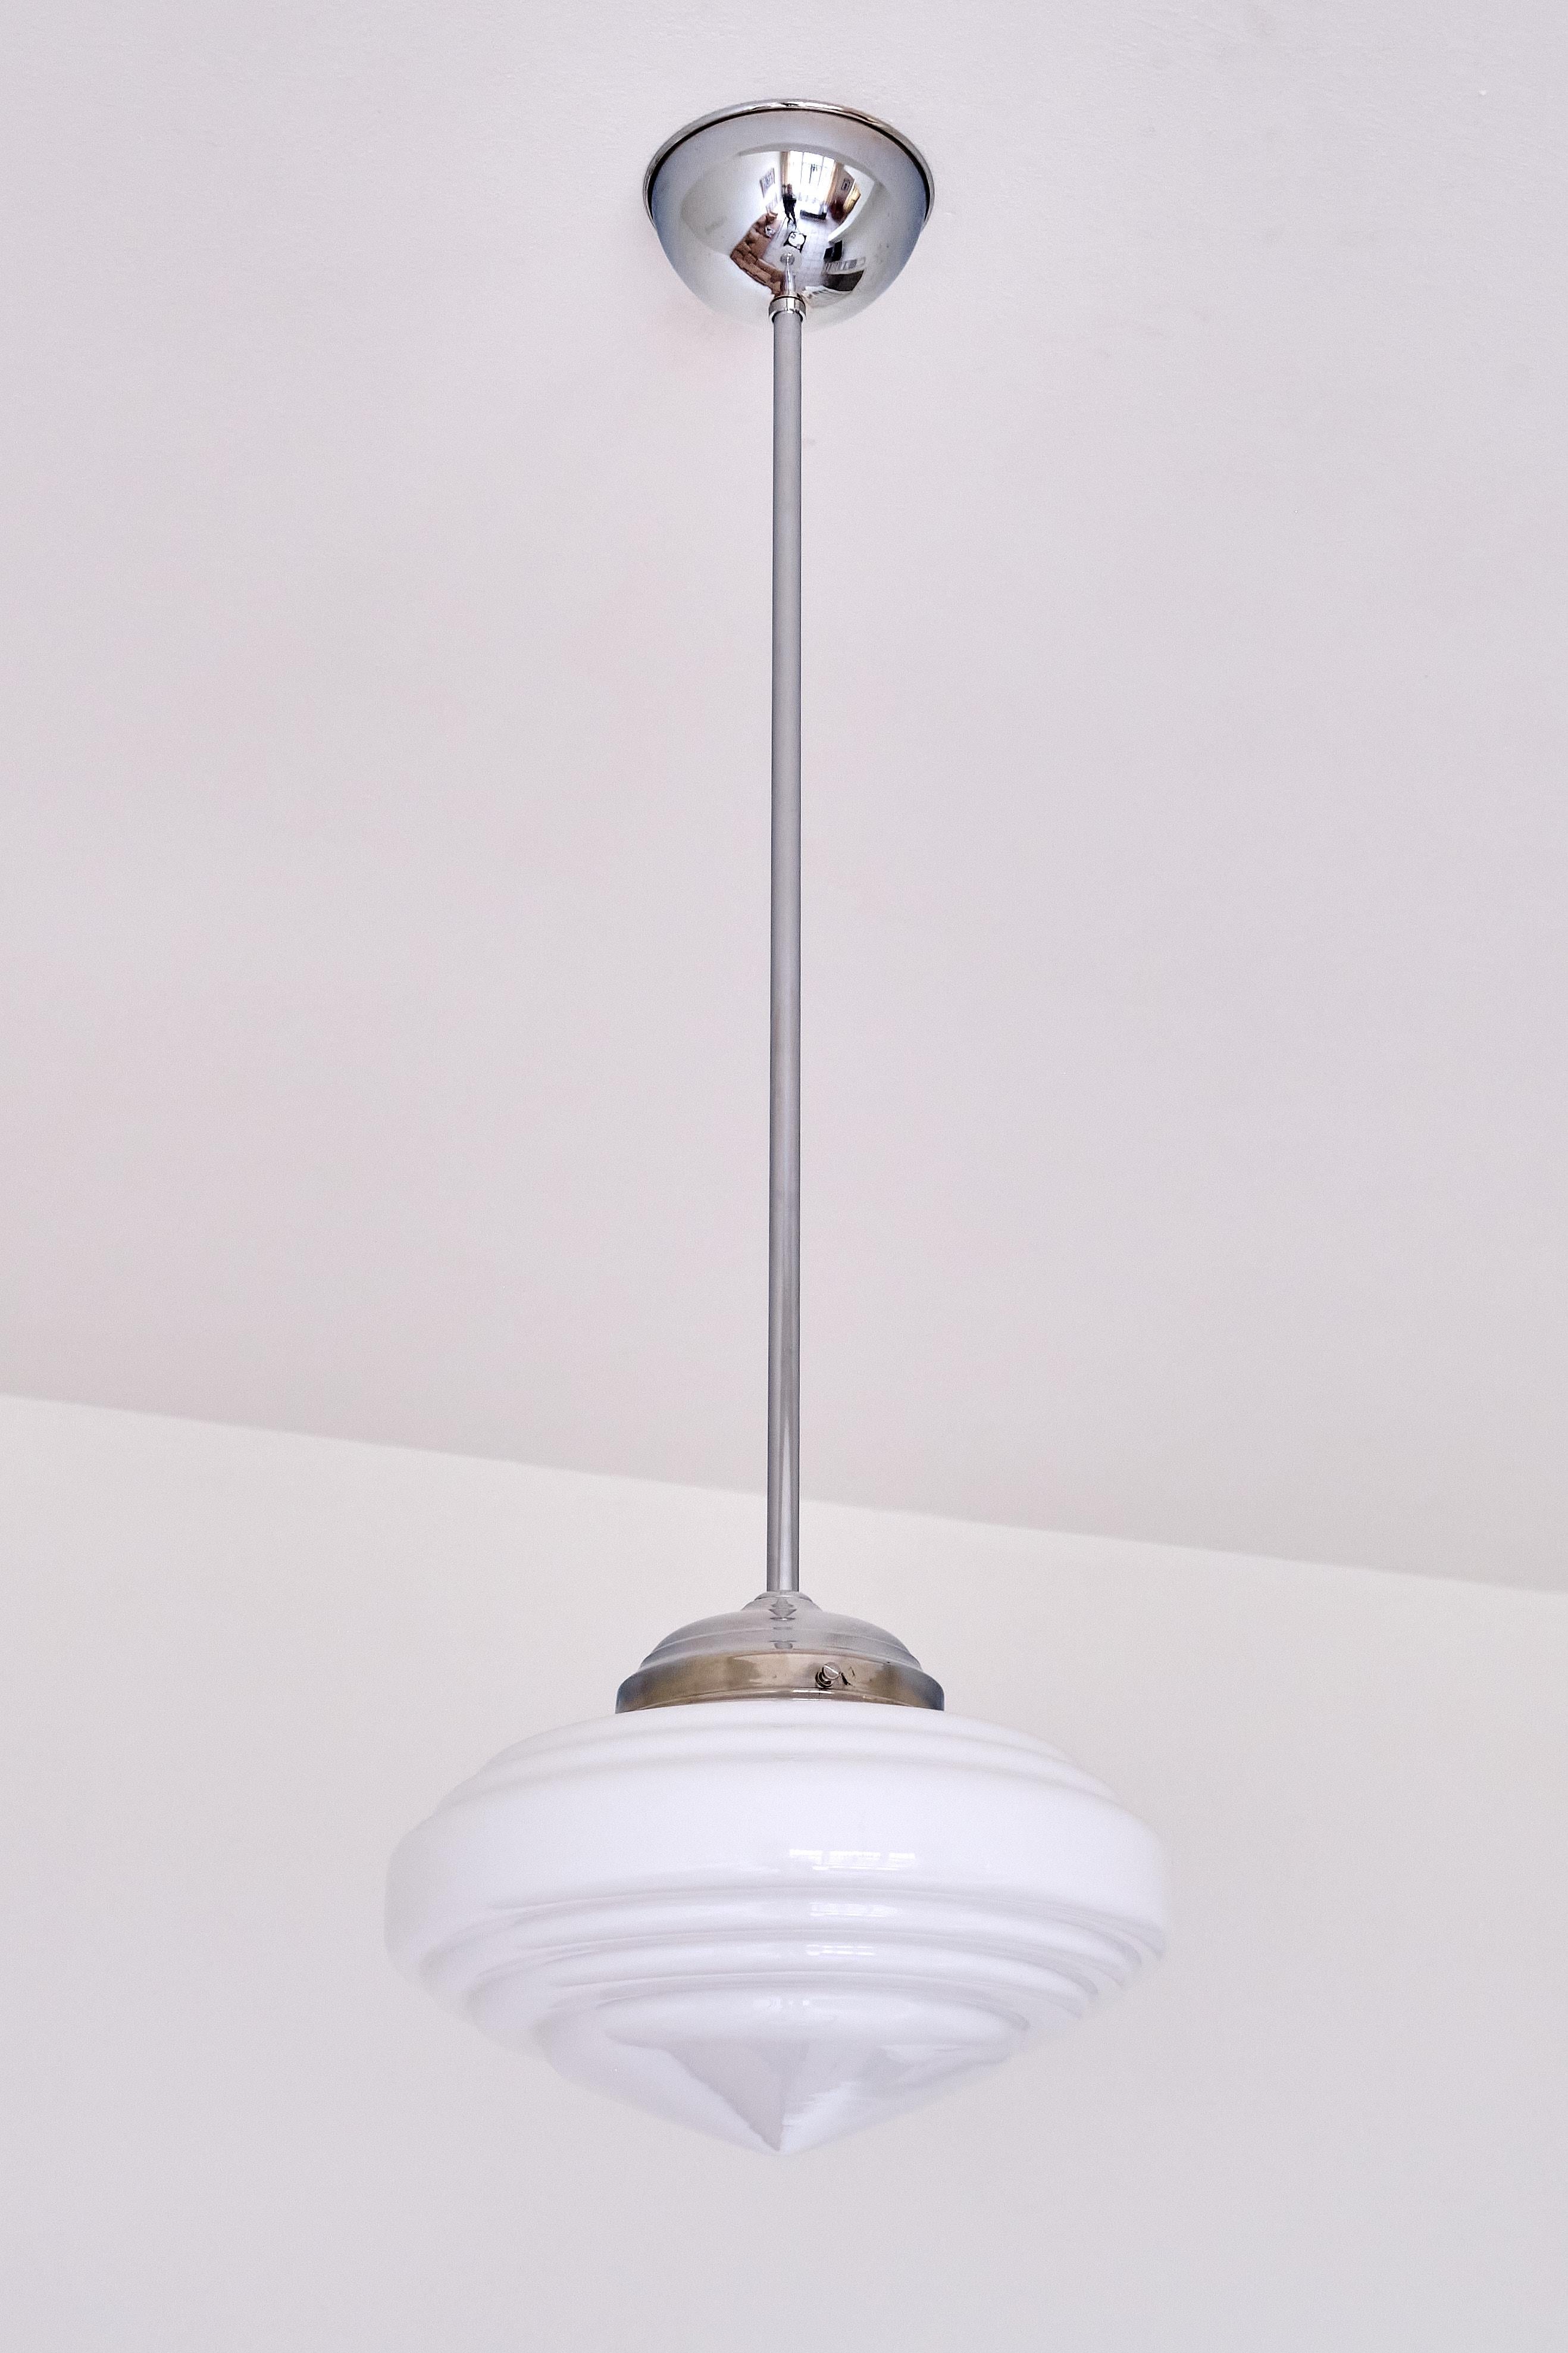 Gispen Art Deco Tiered Pendant Light in Opal Glass and Nickel, Netherlands, 1950 For Sale 4